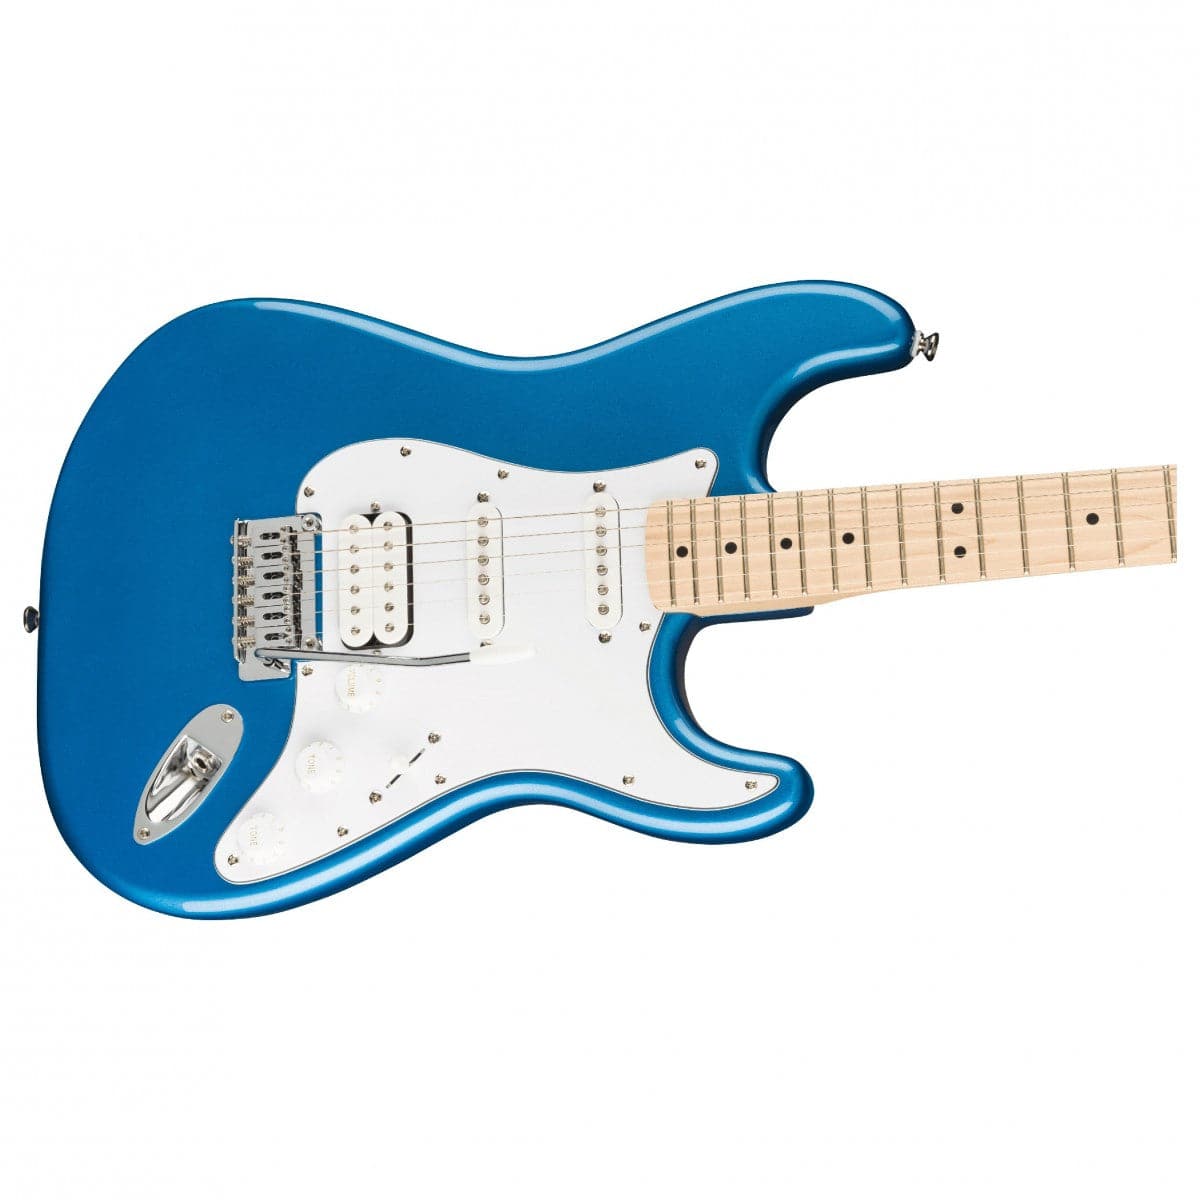 Squier Affinity Stratocaster Electric Guitar Package HSS - Guitar, Amp, Cable, Strap, Picks & Lessons - Lake Placid Blue